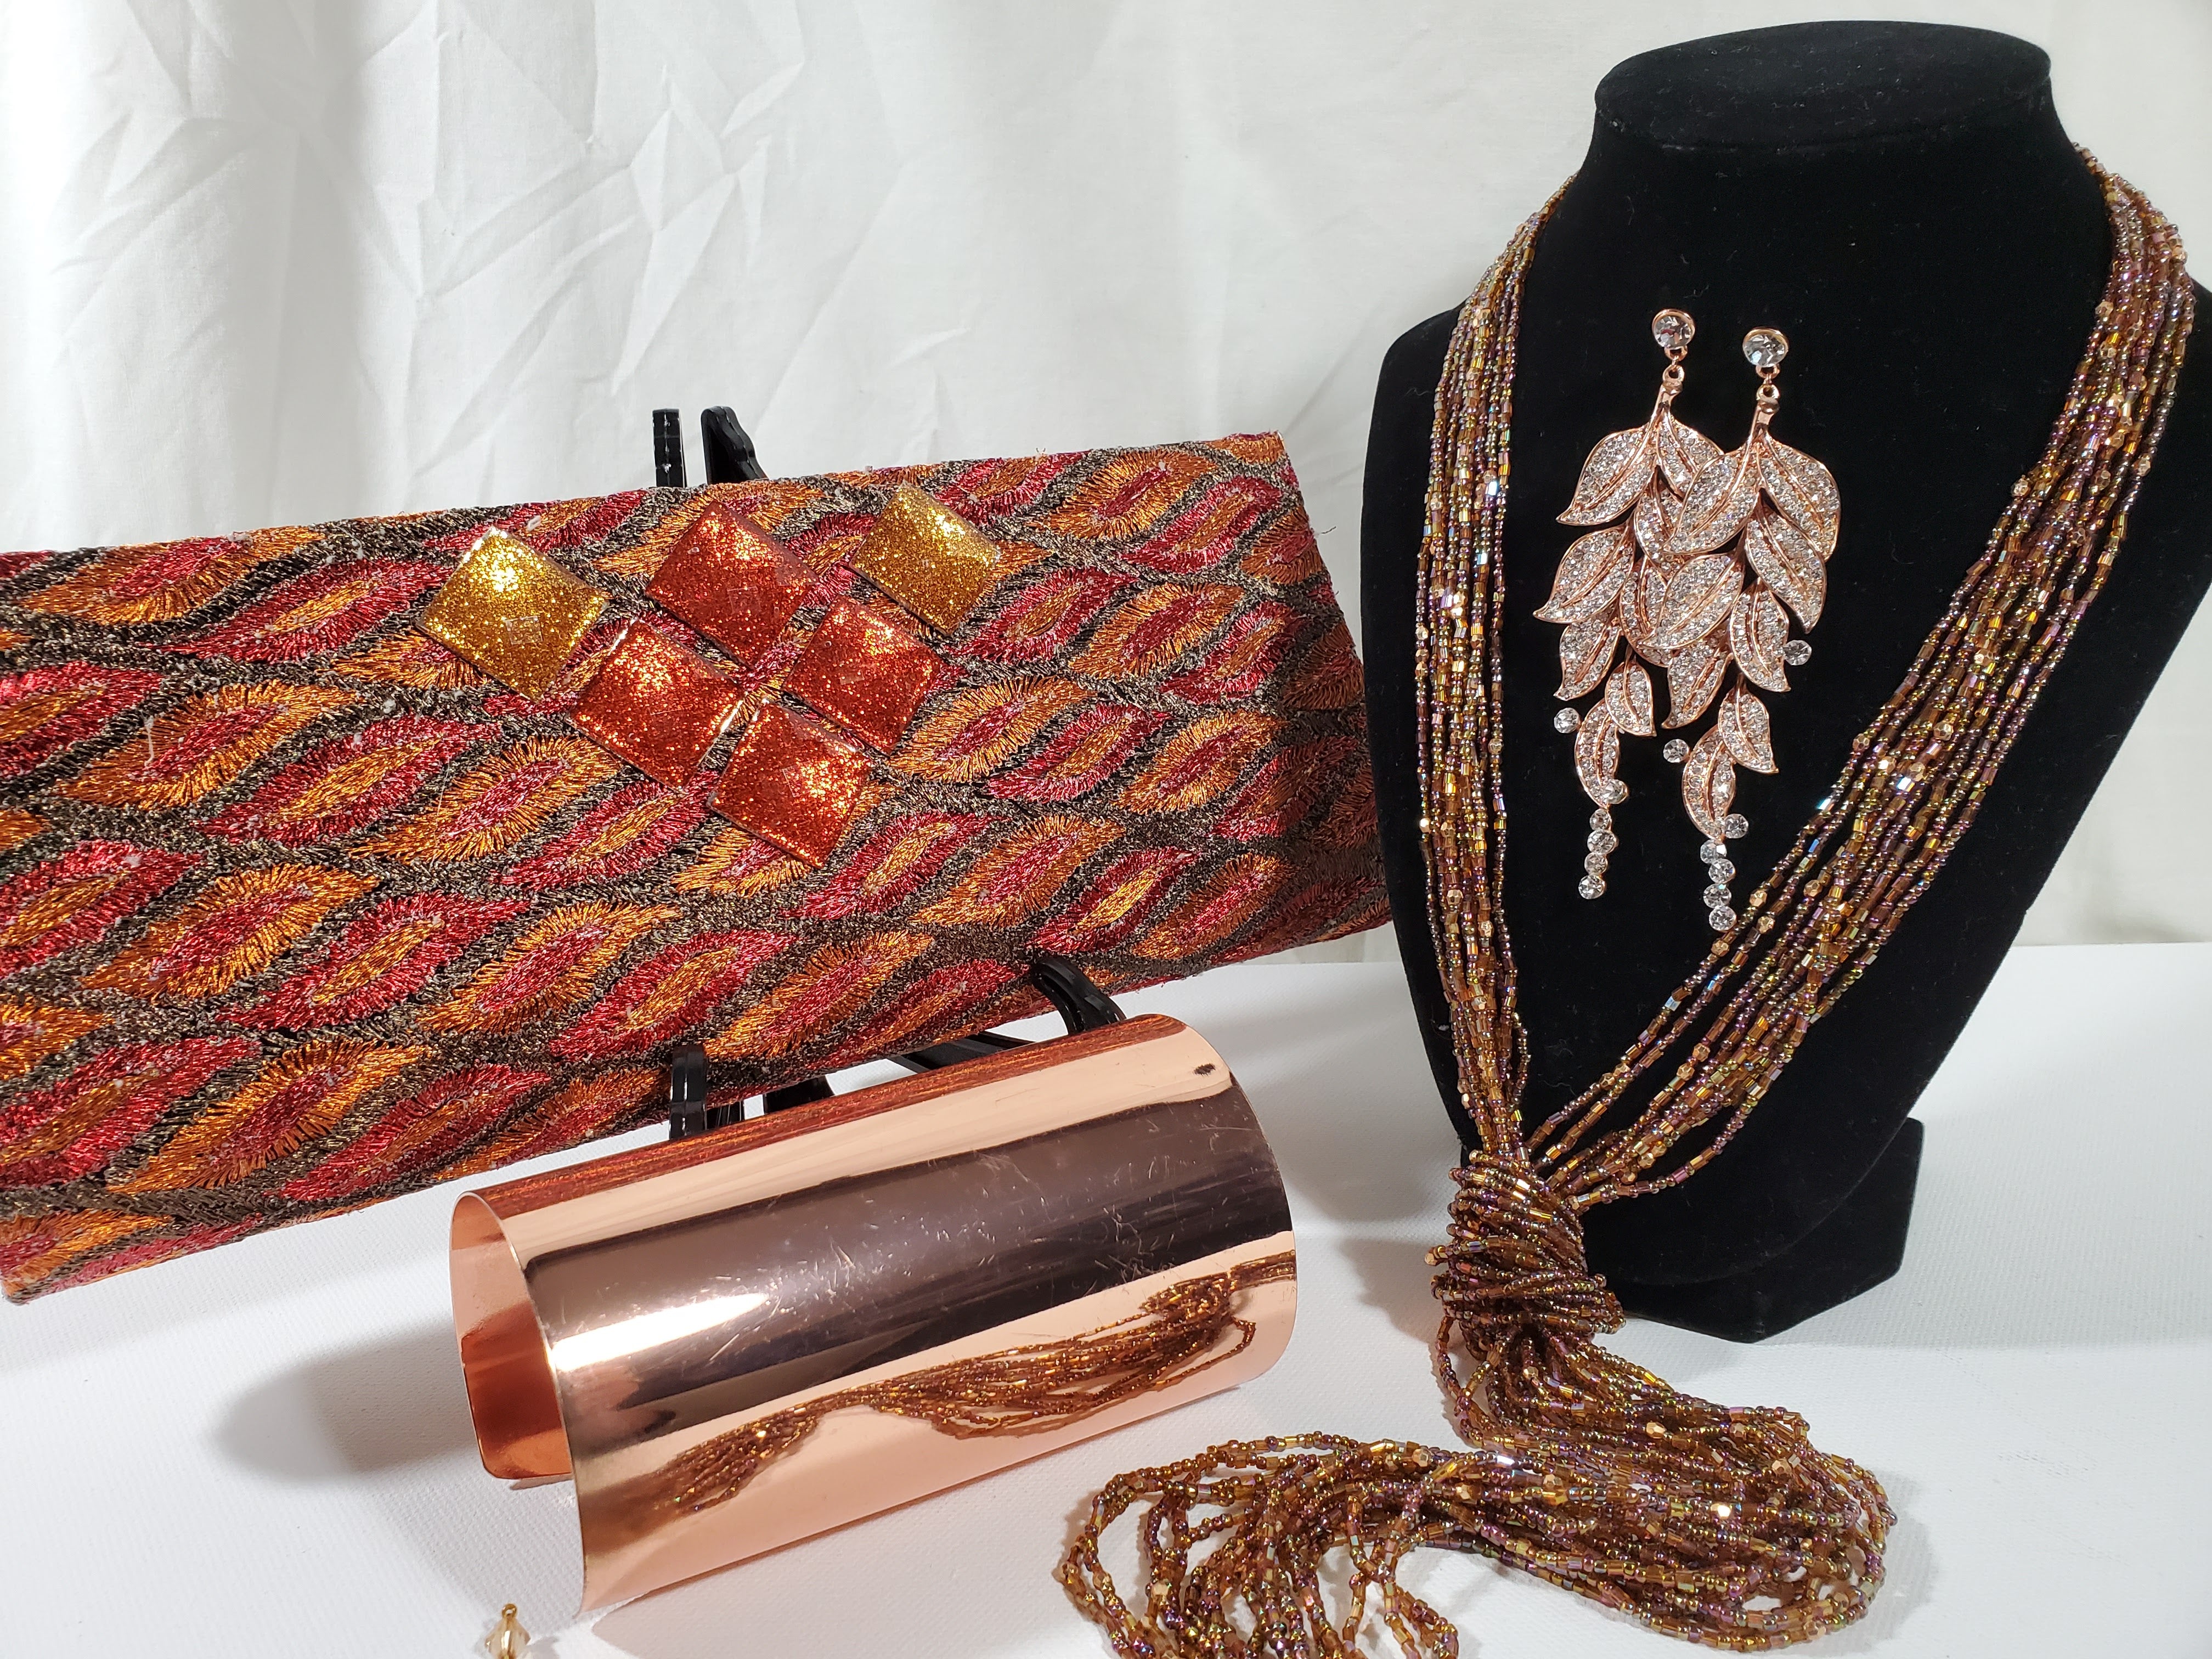 shimmery orange clutch with lasso bead necklace, rose gold rhinestone earrings on stand and copper cuff at forefront